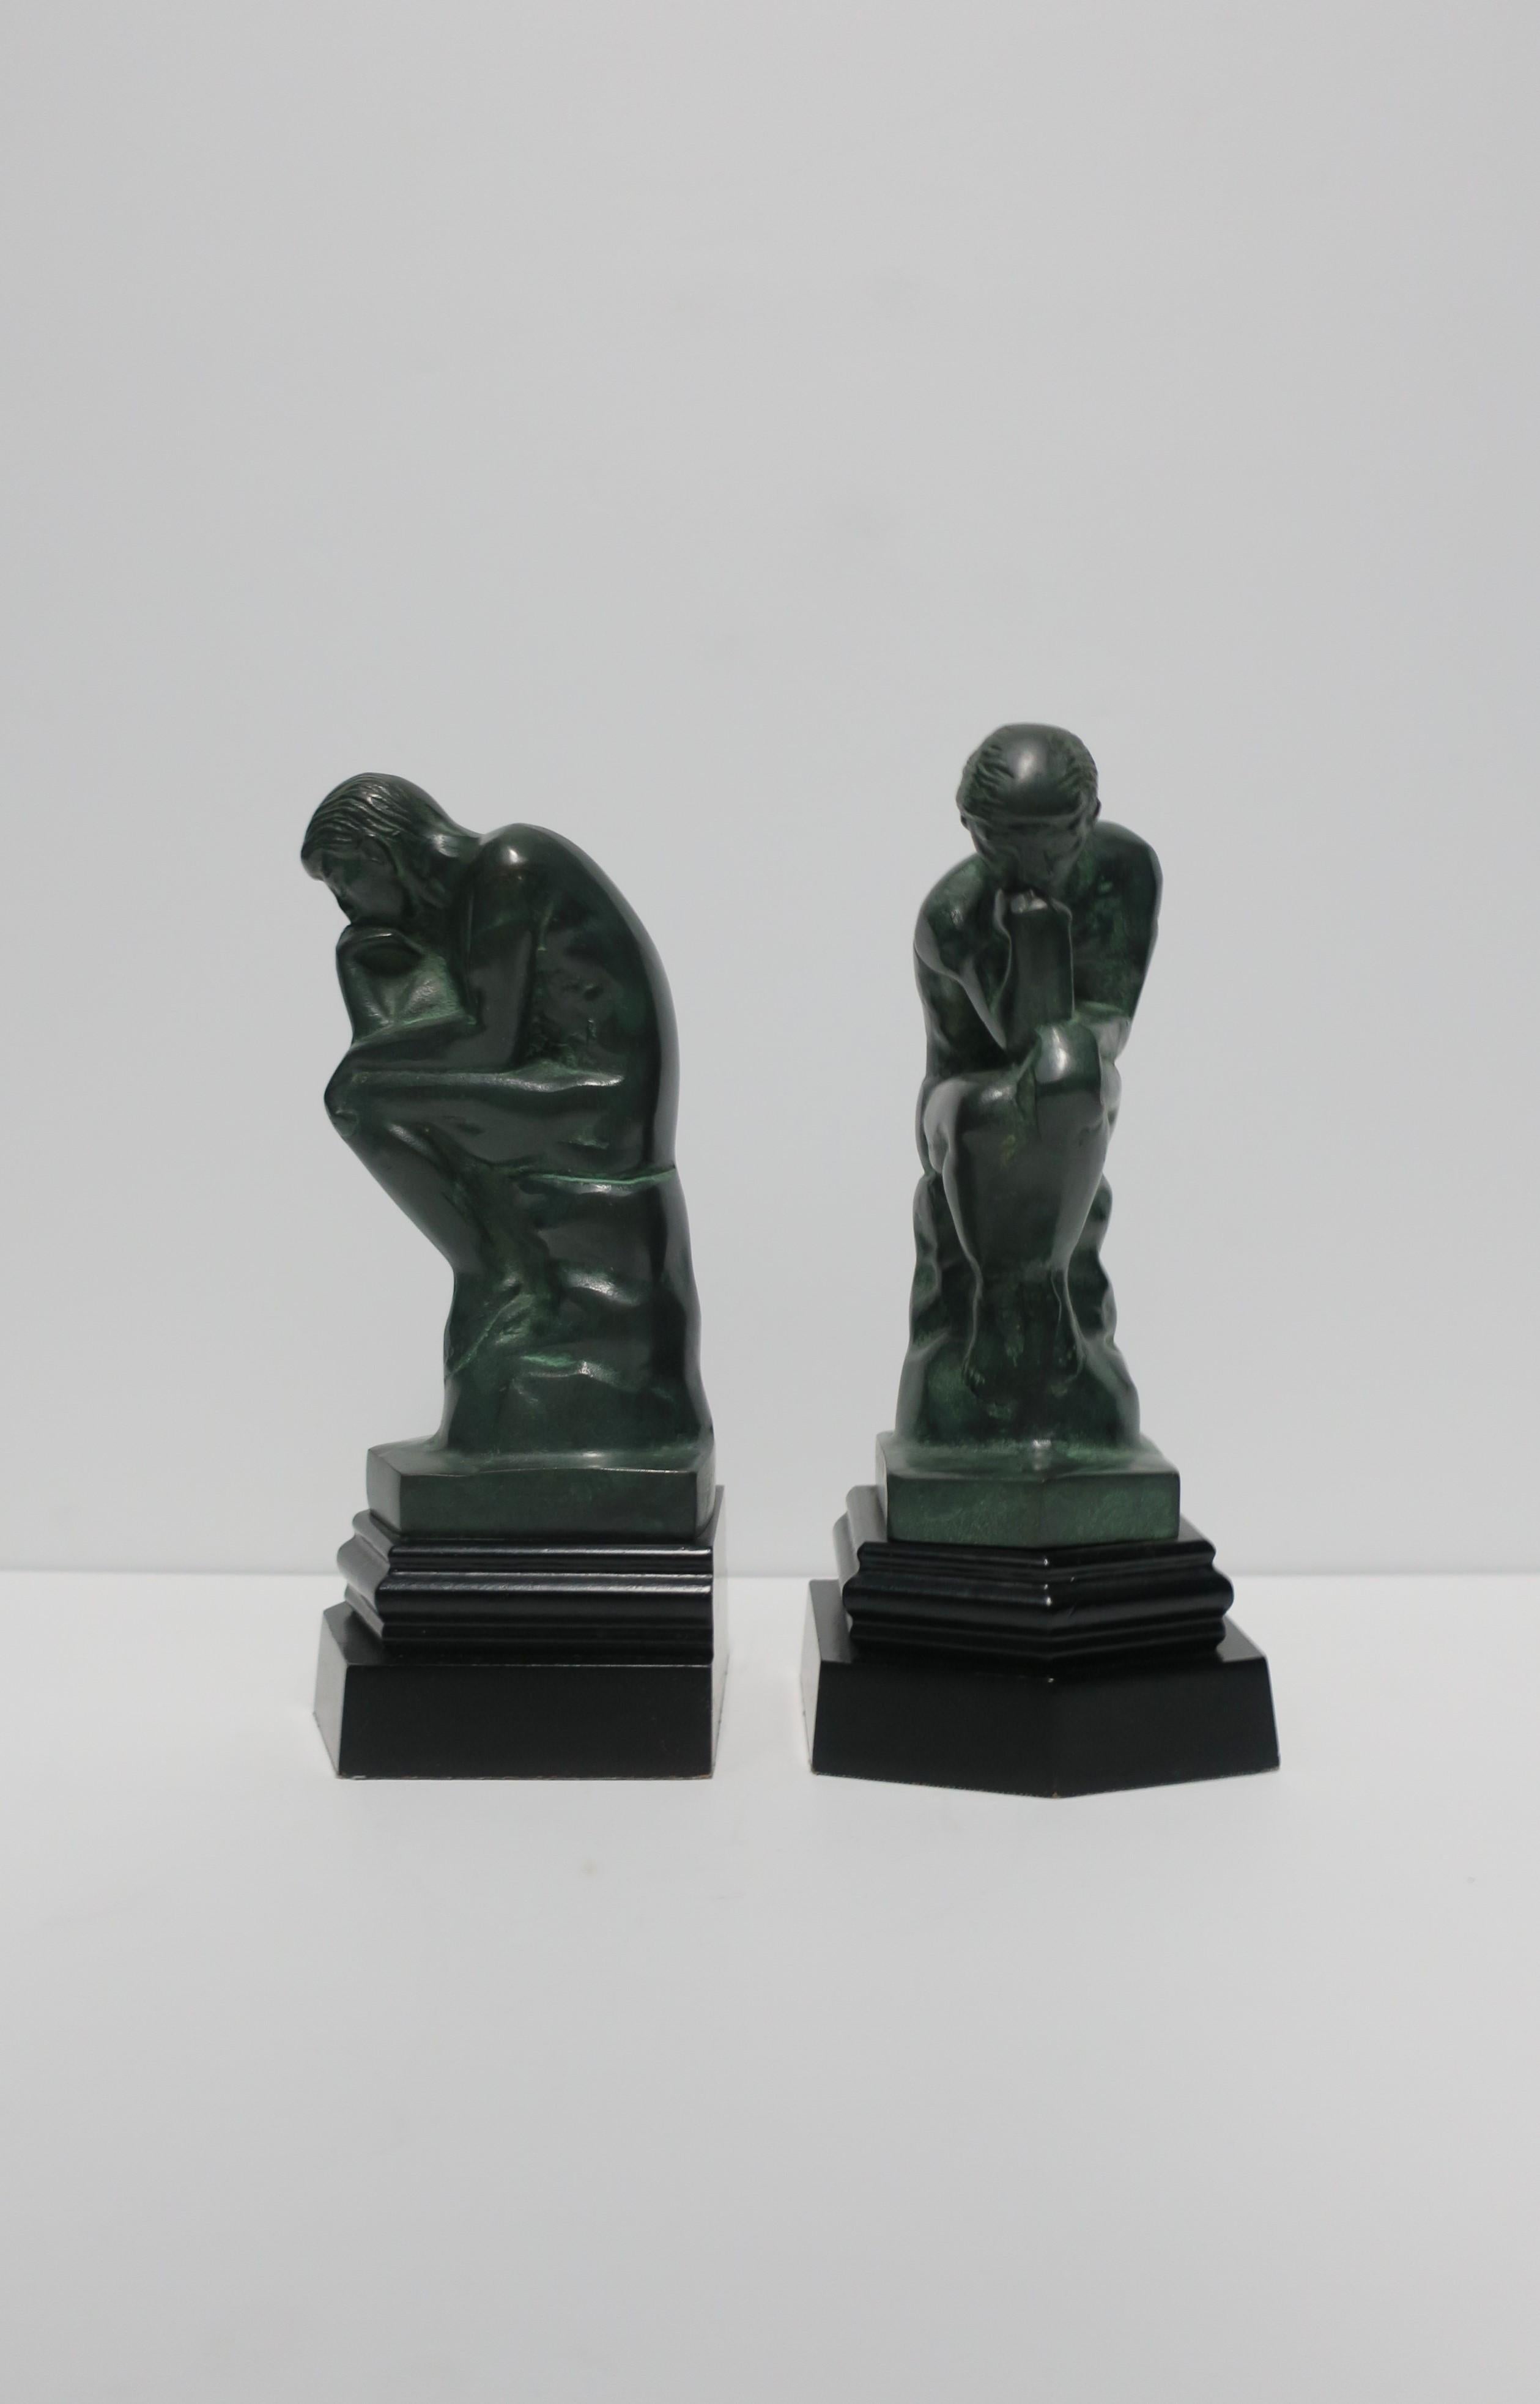 American Black and Green Male Sculpture Bookends, Pair